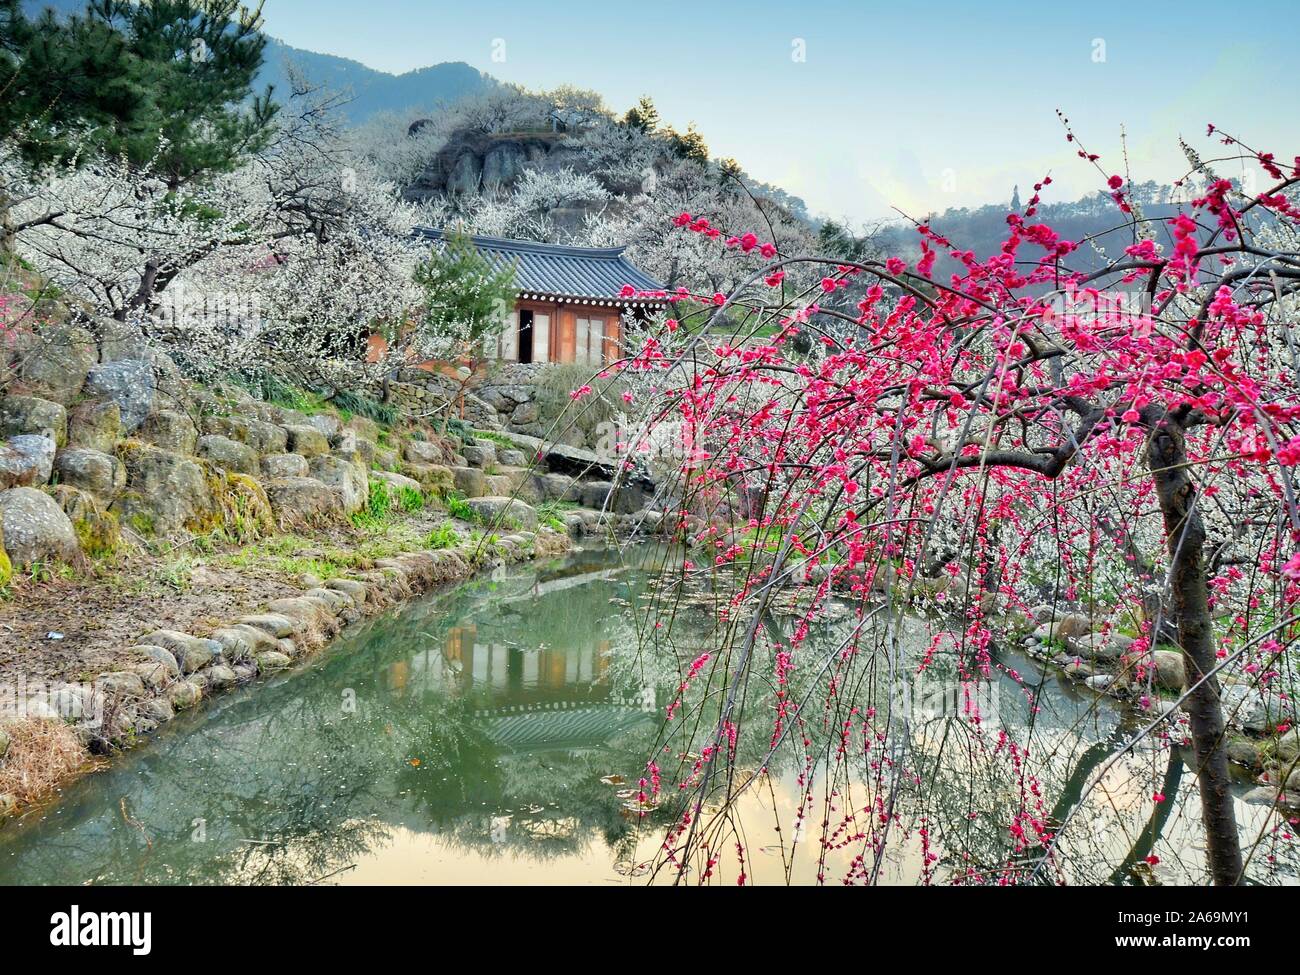 Spring blossom in Gwangyang, South Korea, during Maehwa flower festival. Stock Photo